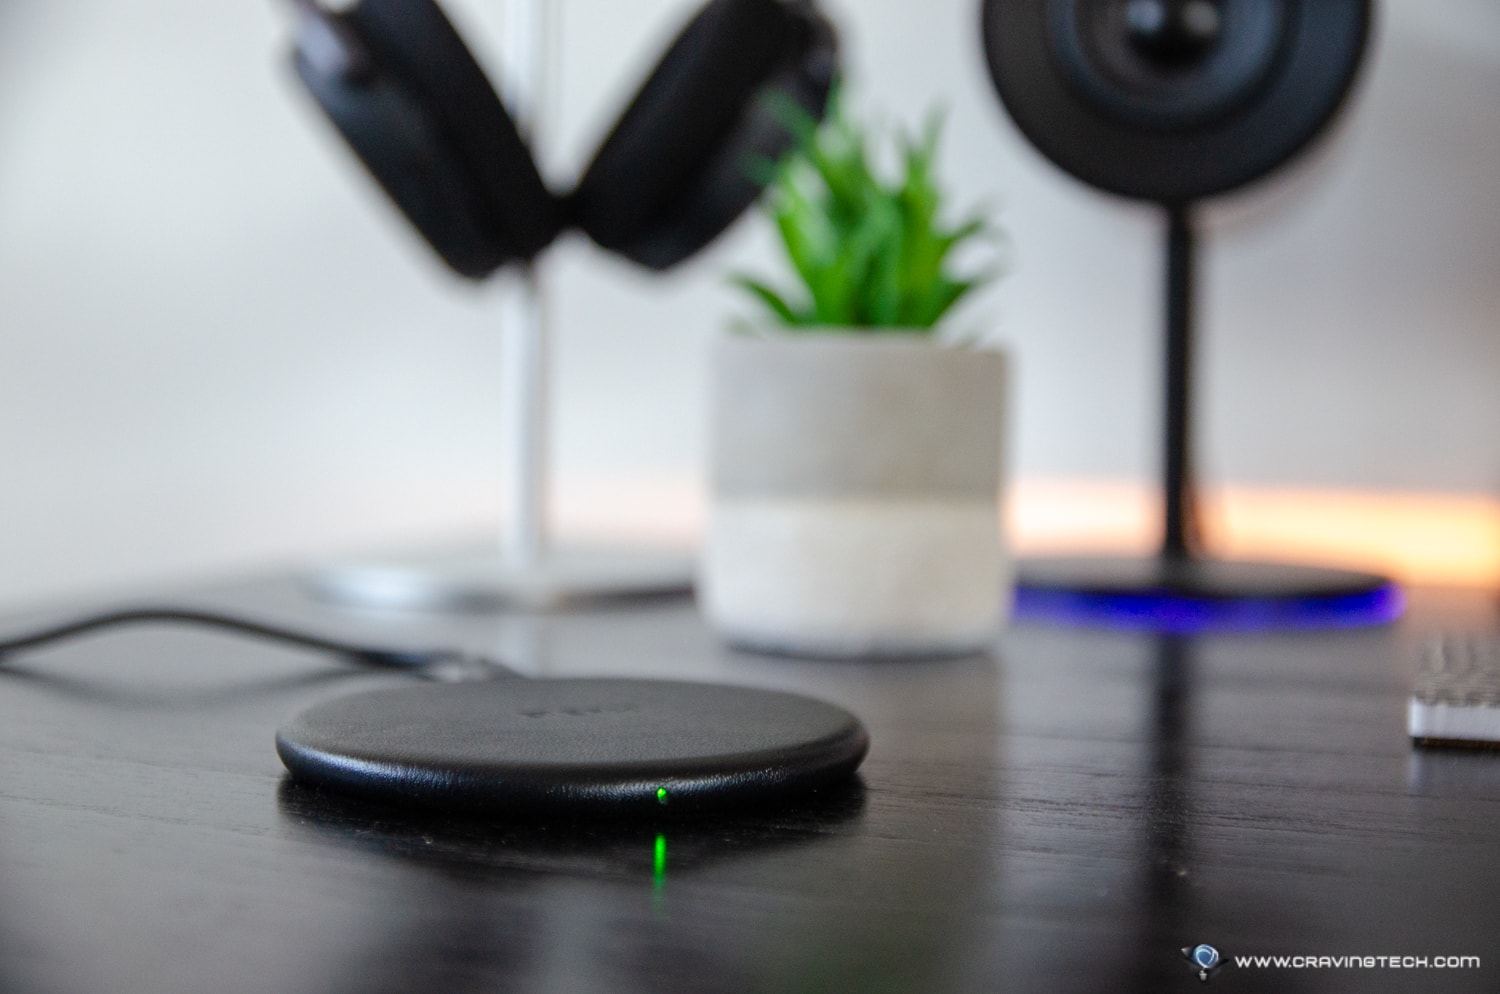 EFM Leather Wireless Charger Review